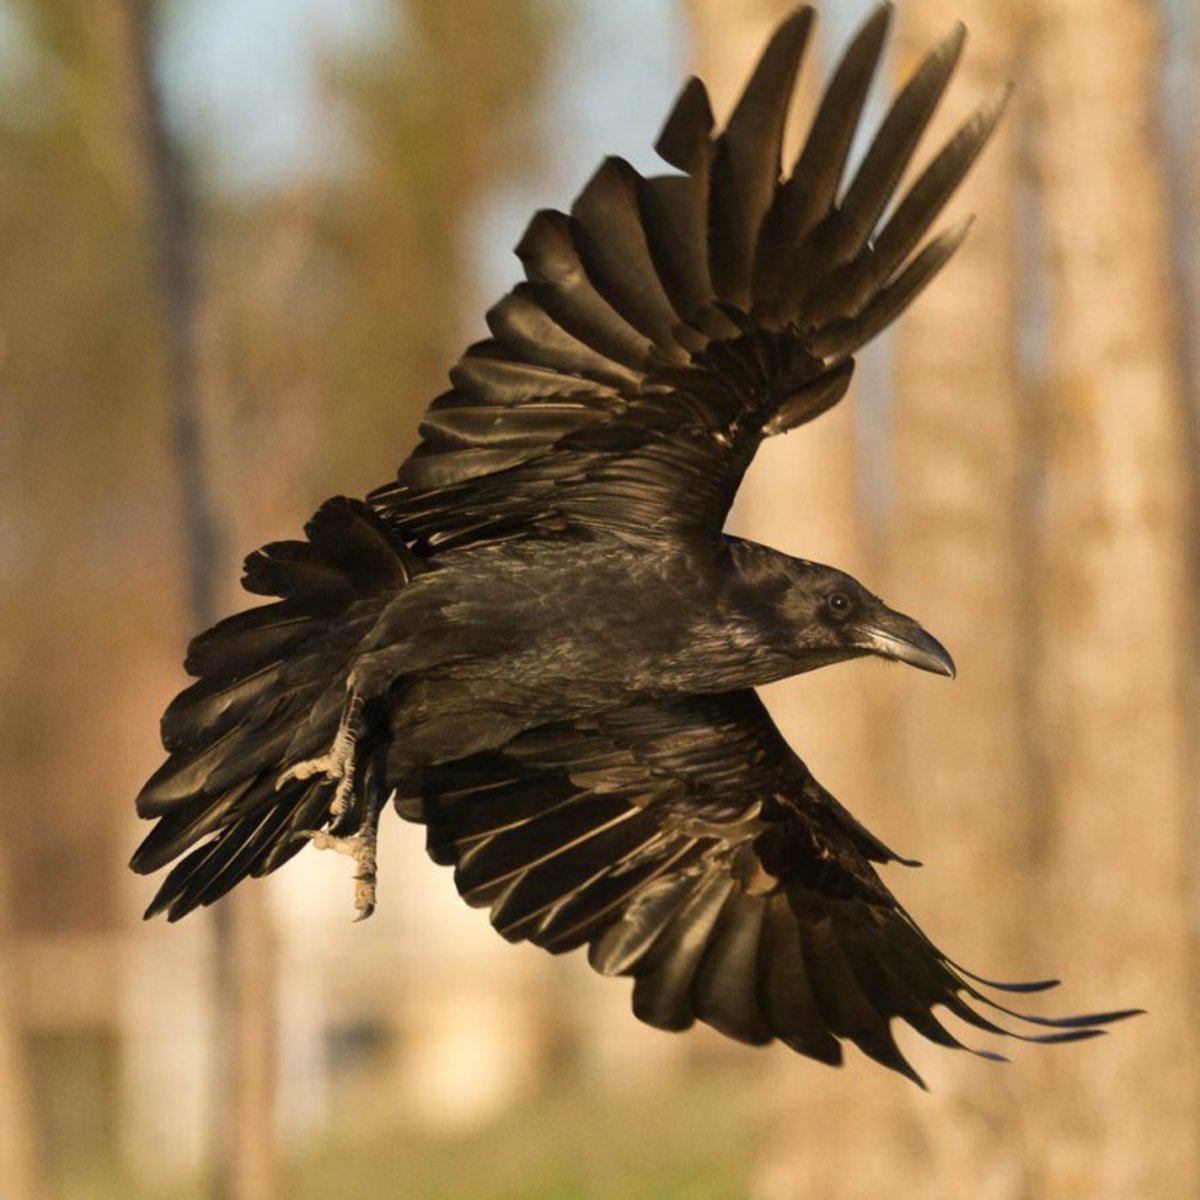 Raven in flight - bird of the battlefield, Odin's  scouts to bring him news from the Nine Worlds